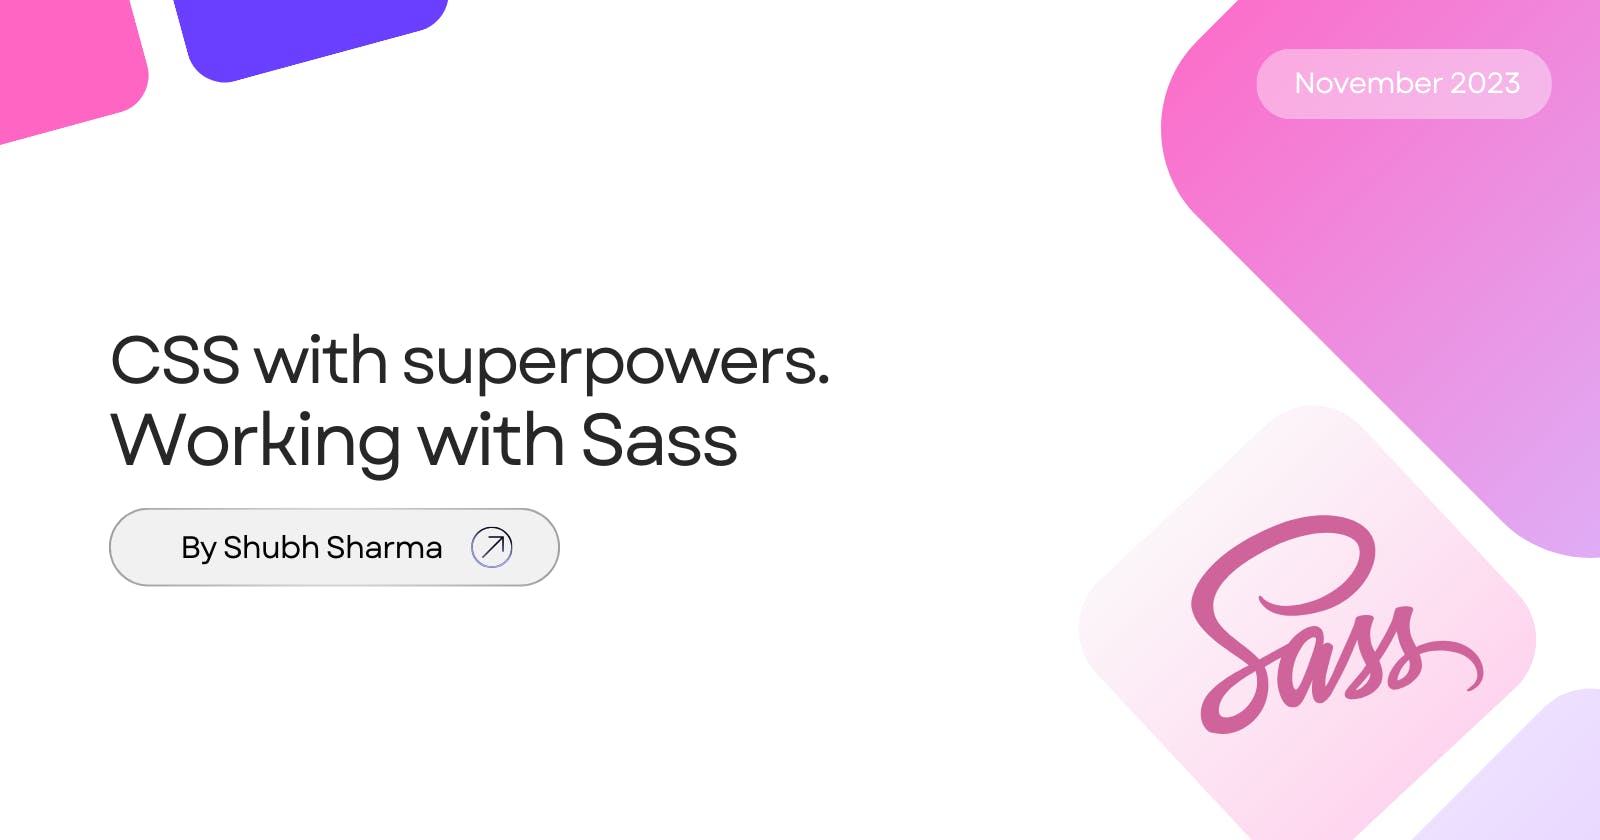 CSS with superpowers? Working with Sass.